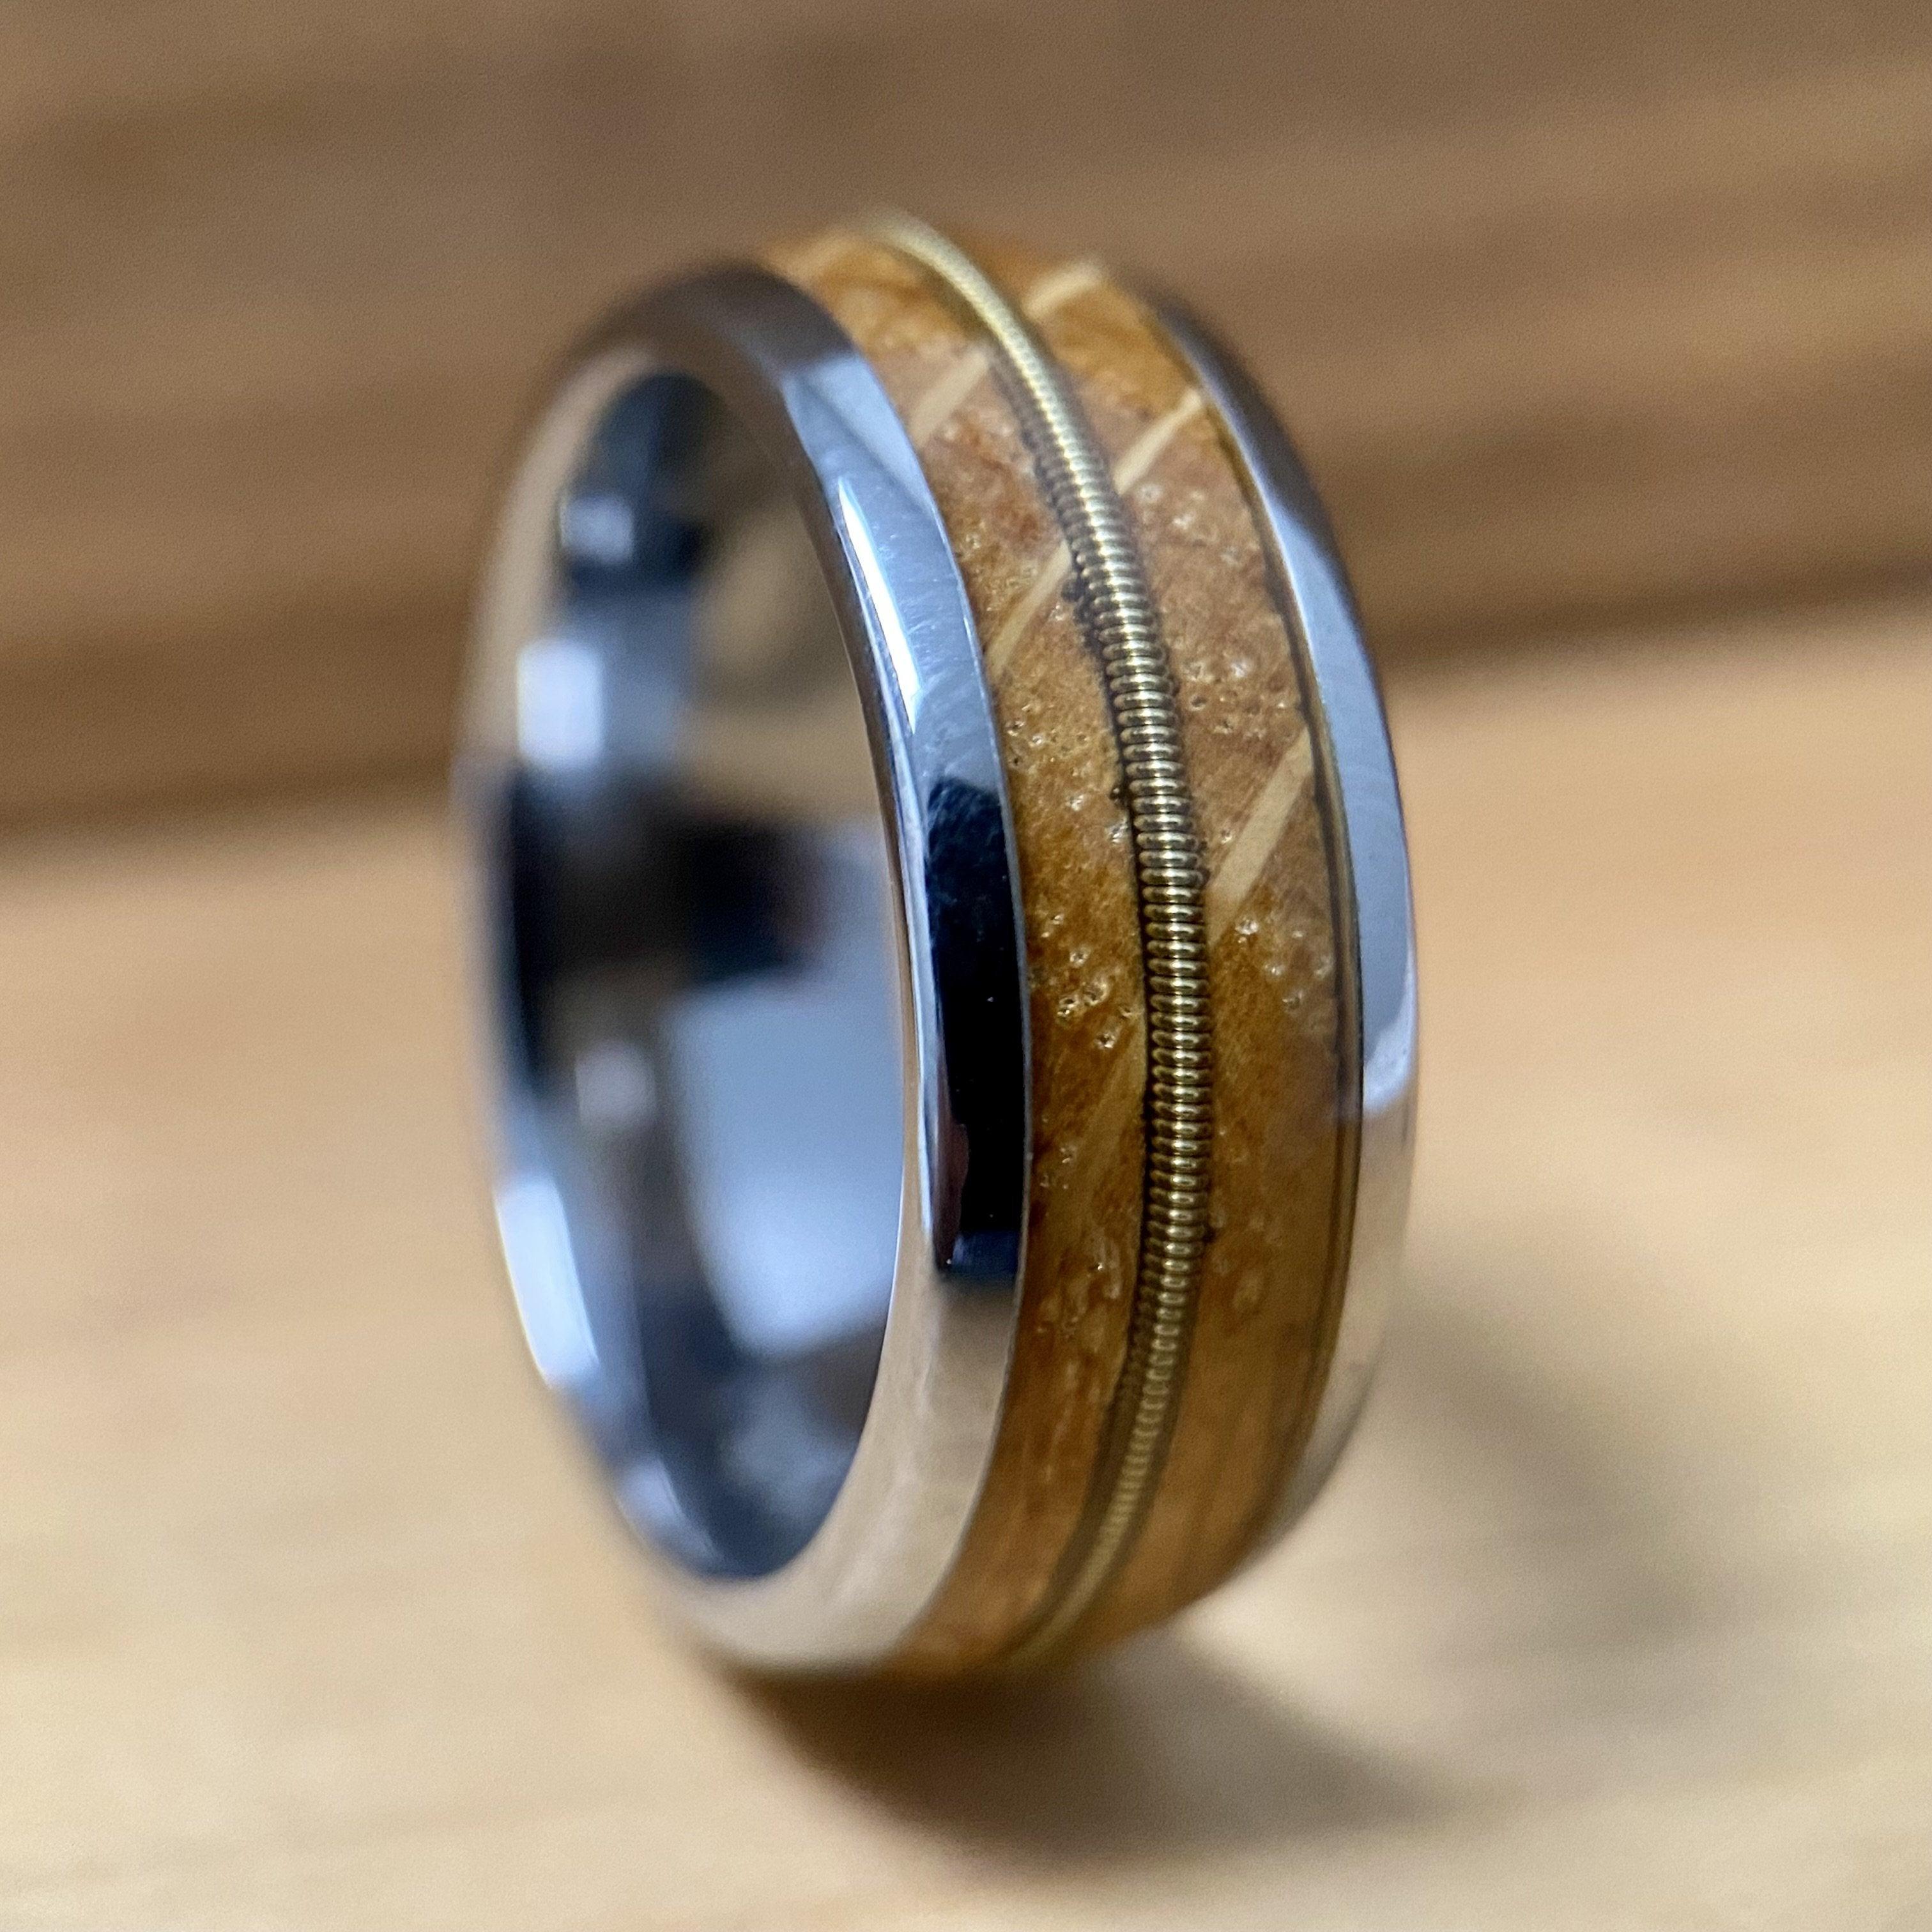 How To Choose A Men's Wedding Band - Silver Spring Jewelers